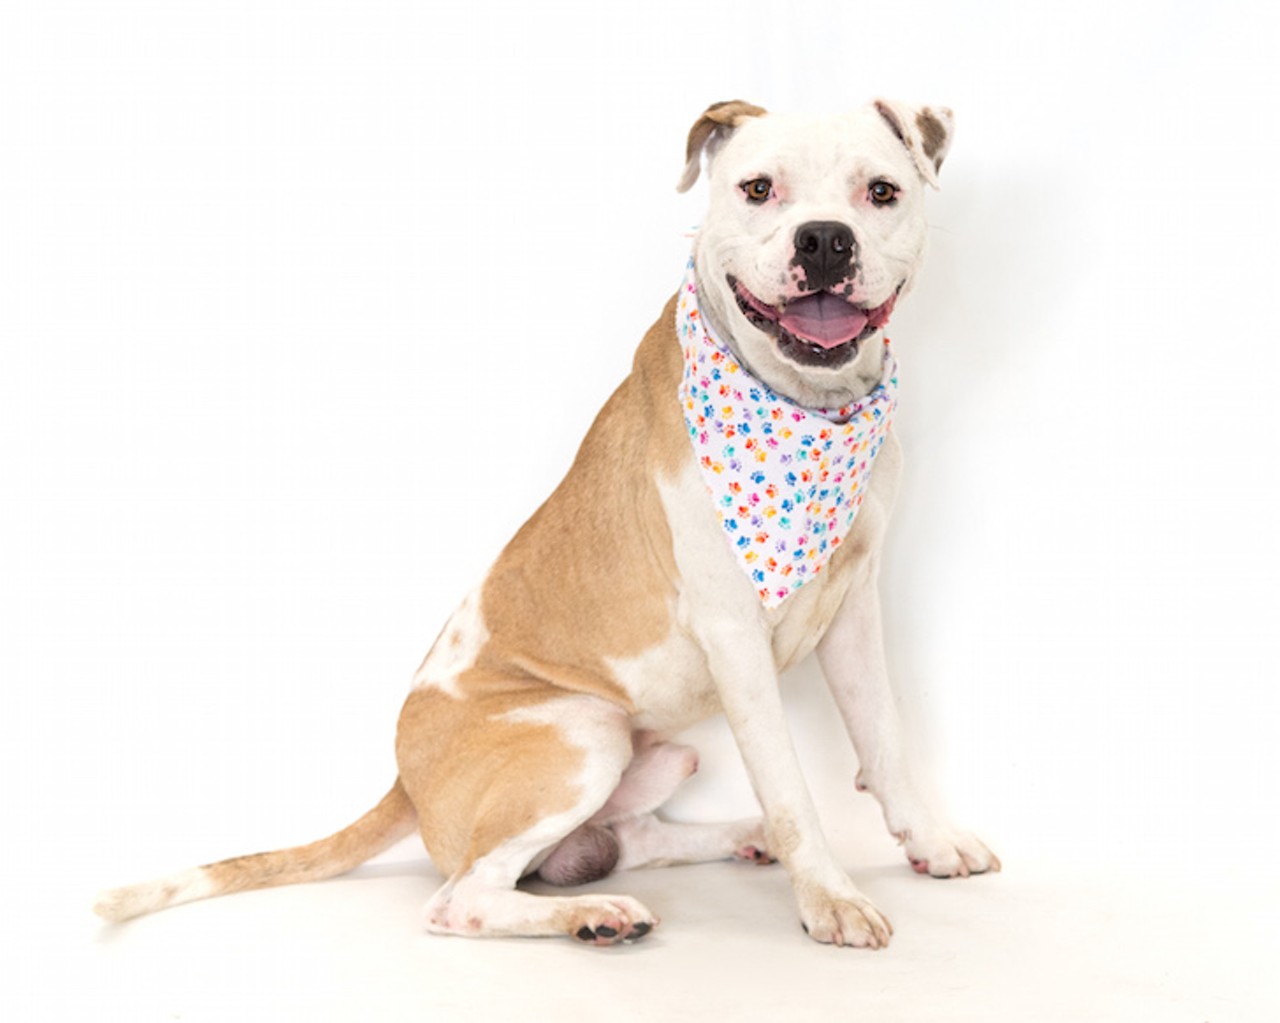 19 adoptable dogs looking for a good home in Orange County